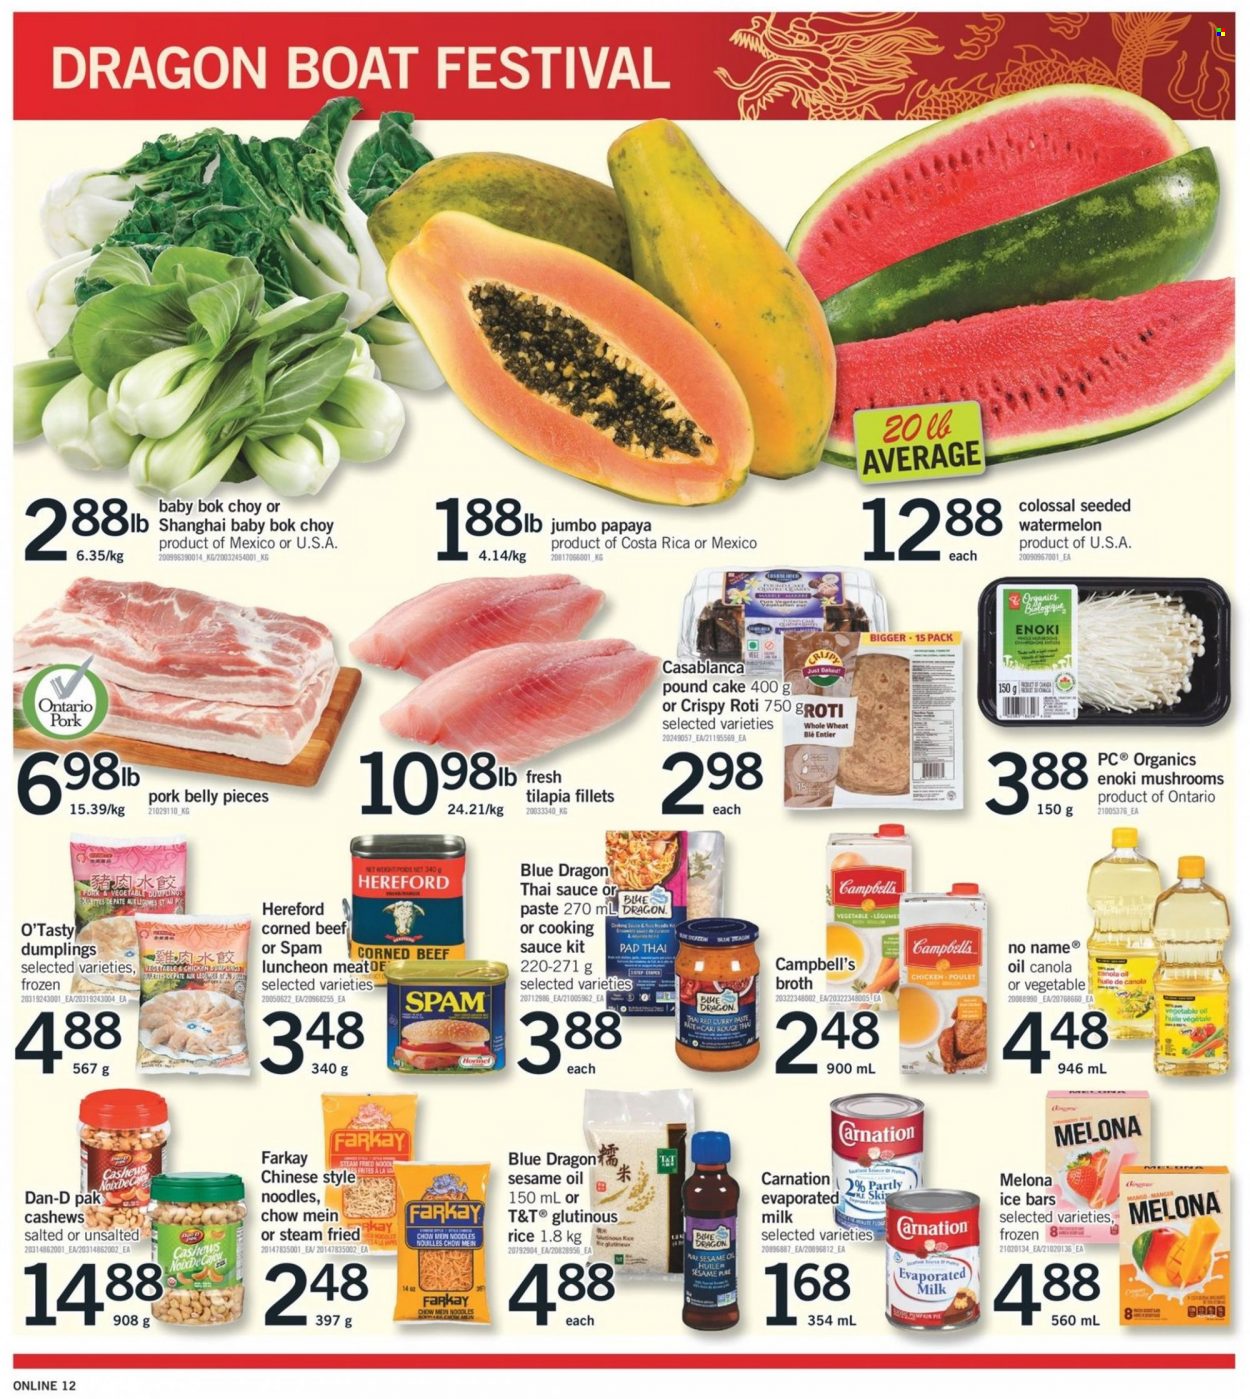 thumbnail - Fortinos Flyer - May 26, 2022 - June 01, 2022 - Sales products - mushrooms, cake, pound cake, bok choy, mango, watermelon, papaya, tilapia, No Name, Campbell's, dumplings, noodles, red curry, Spam, lunch meat, corned beef, evaporated milk, broth, Dan-D Pak, curry paste, canola oil, sesame oil, vegetable oil, oil, cashews, beef meat, pork belly, pork meat, boat. Page 14.